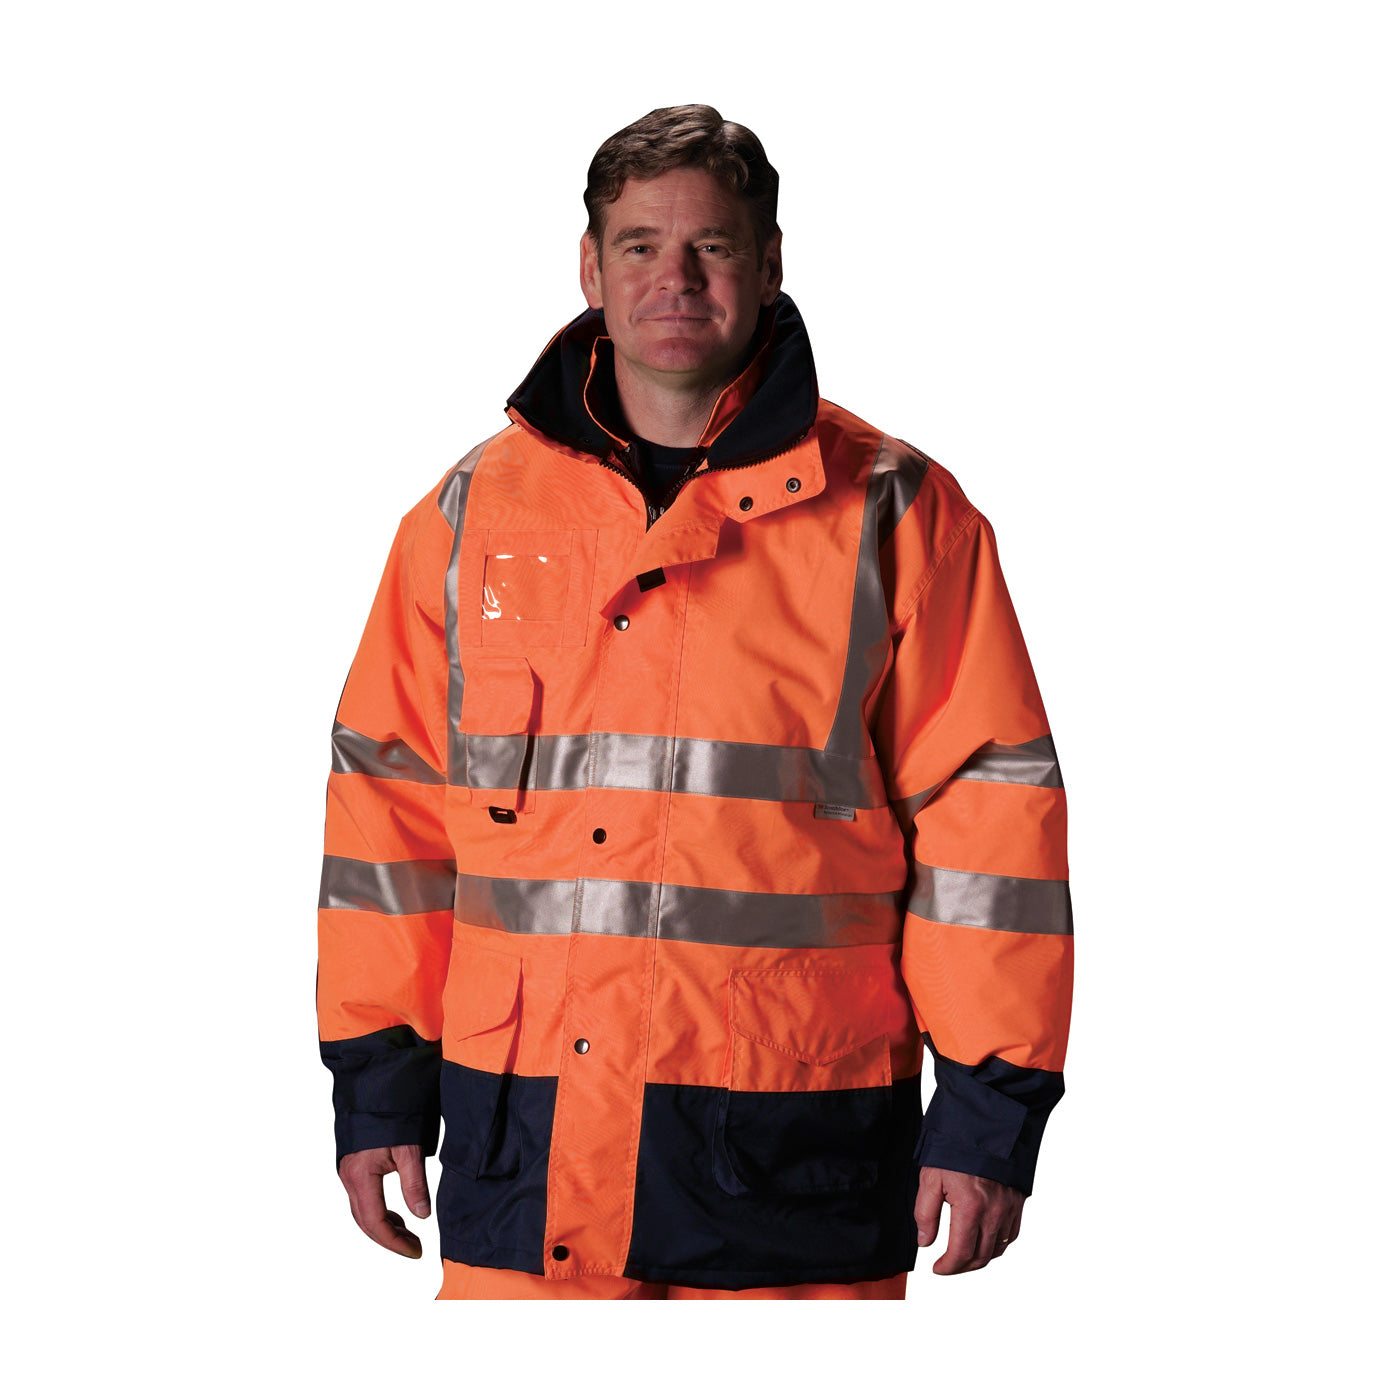 PIP 343-1756-OR/XL ANSI Type R Class 3 7-in-1 All Conditions Coat with Inner Jacket and Vest Combination